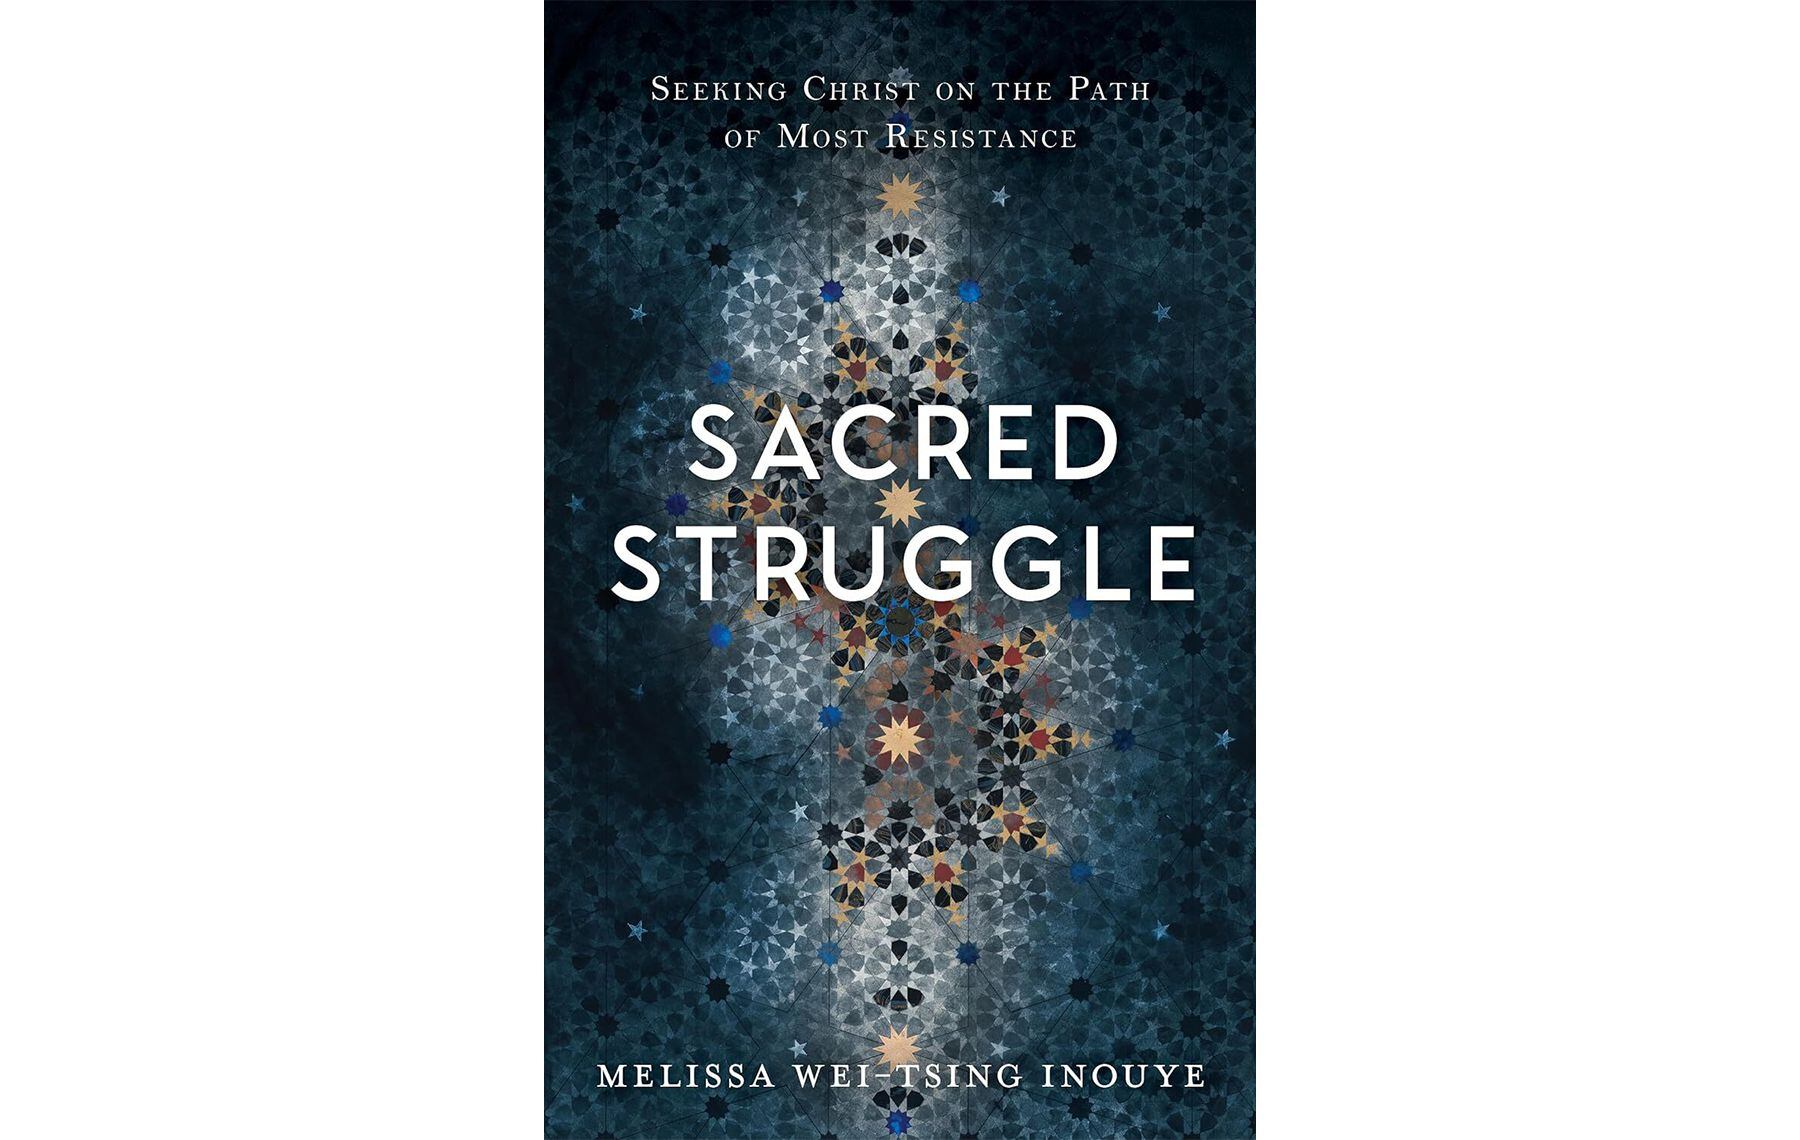 (Deseret Book) Latter-day Saint scholar Melissa Inouye's latest book. "Sacred Struggle: Seeking Christ on the Path of Most Resistance." She died Tuesday, April 23, 2024.